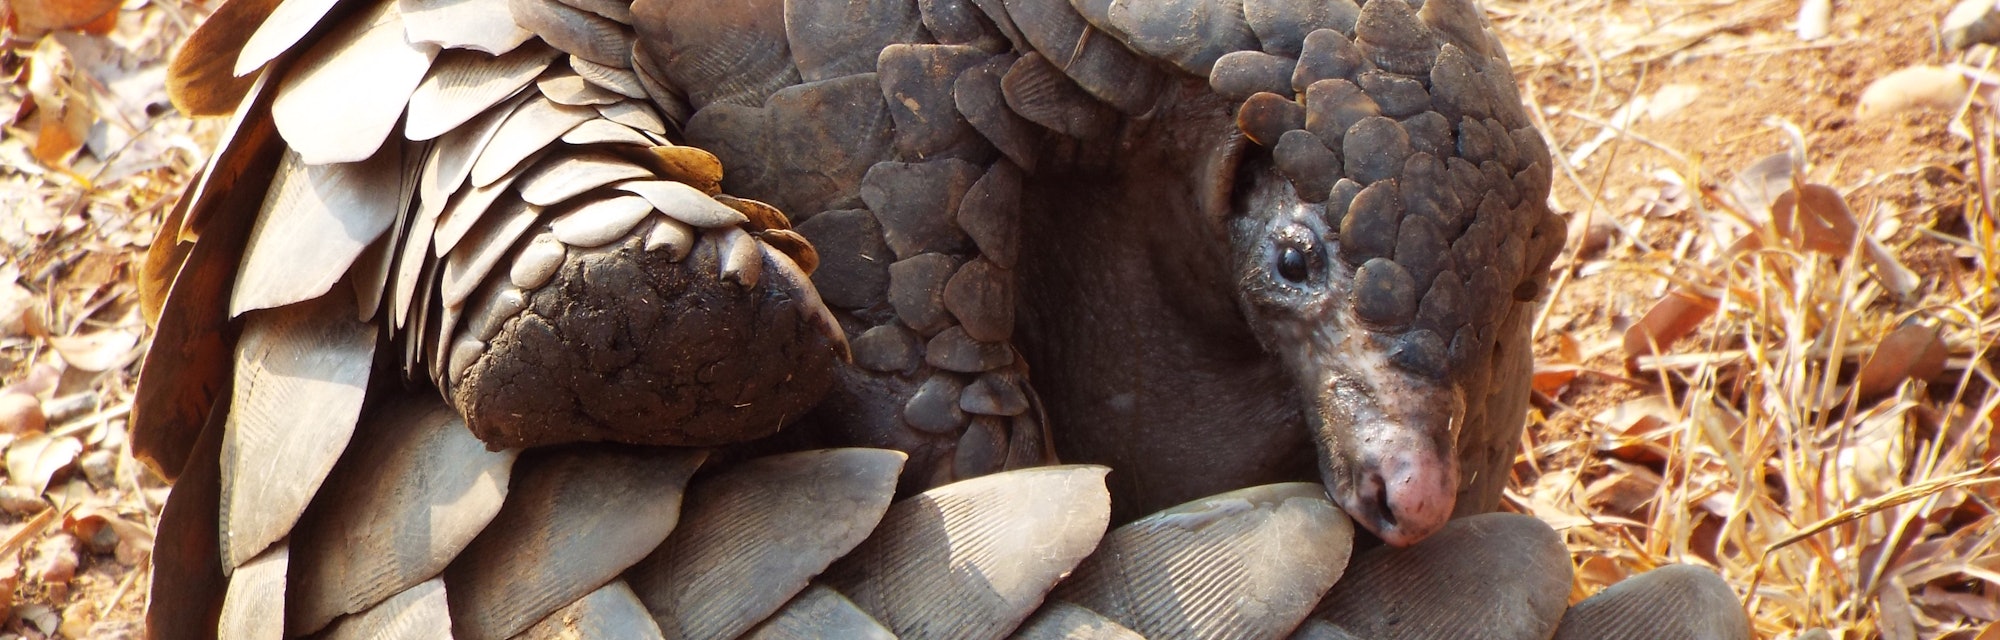 Pangolin close up with scales 